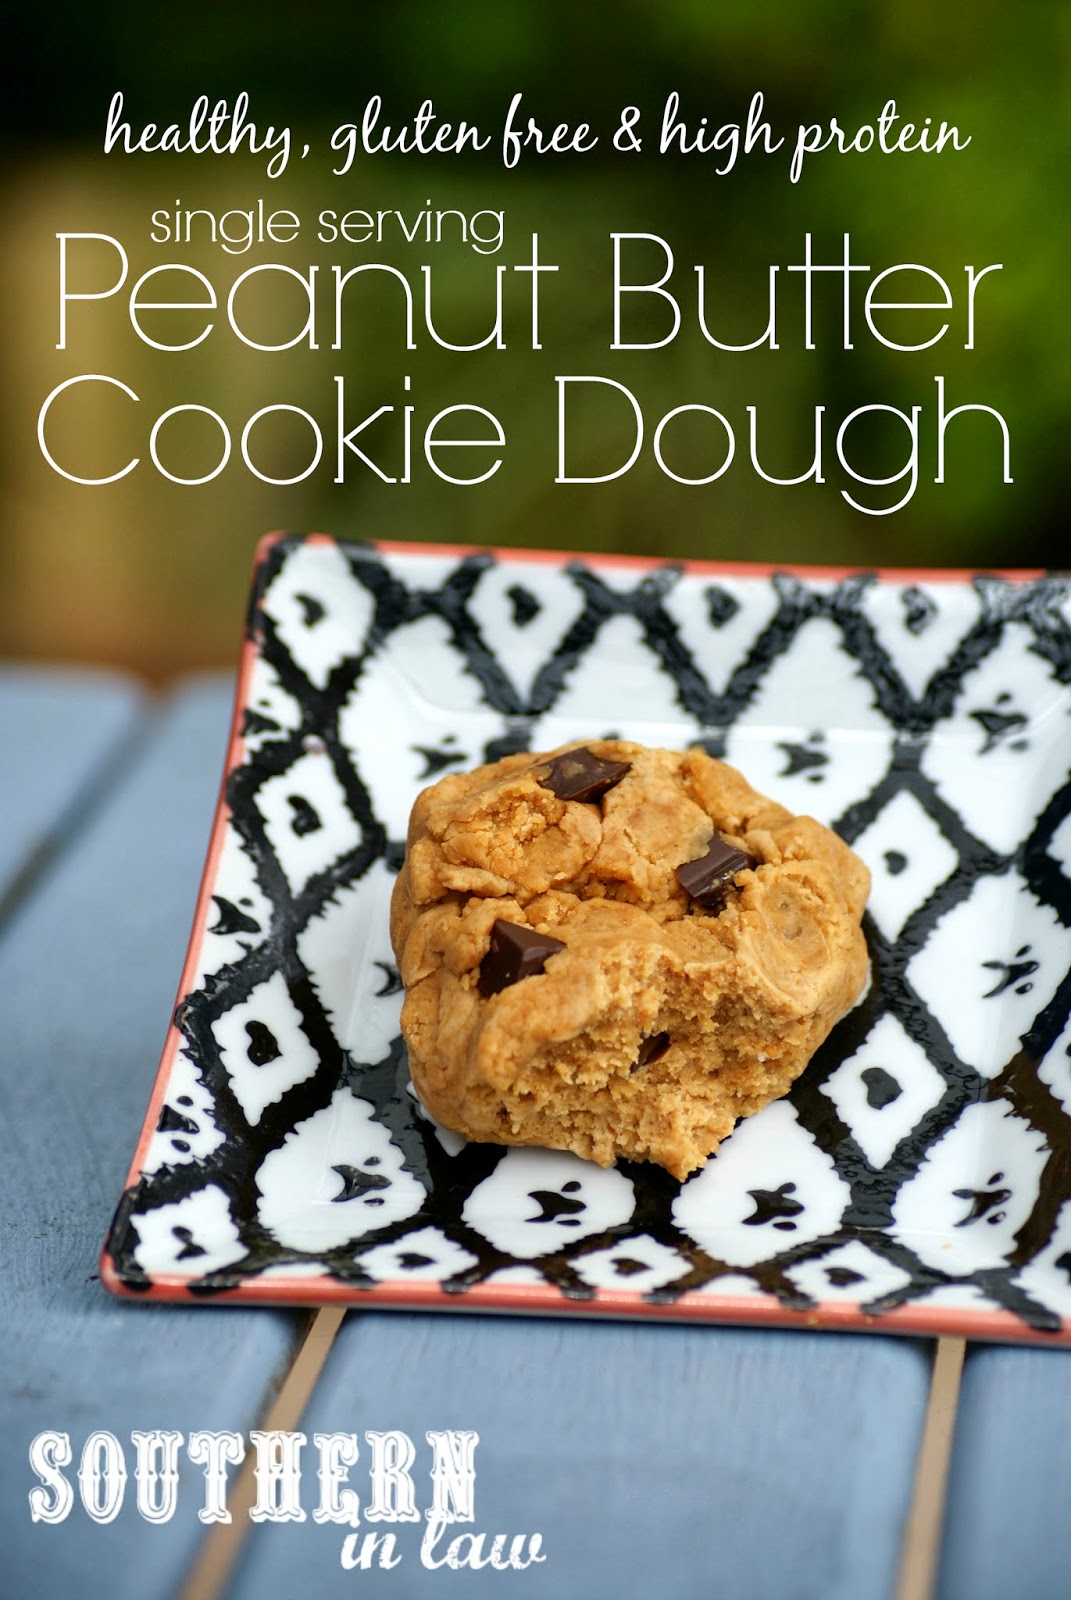 Healthy Peanut Butter Cookie Dough for One - Single Serving Protein Cookie Dough - Gluten Free, Low Fat, Clean Eating Friendly, Grain Free, Sugar Free, Vegan